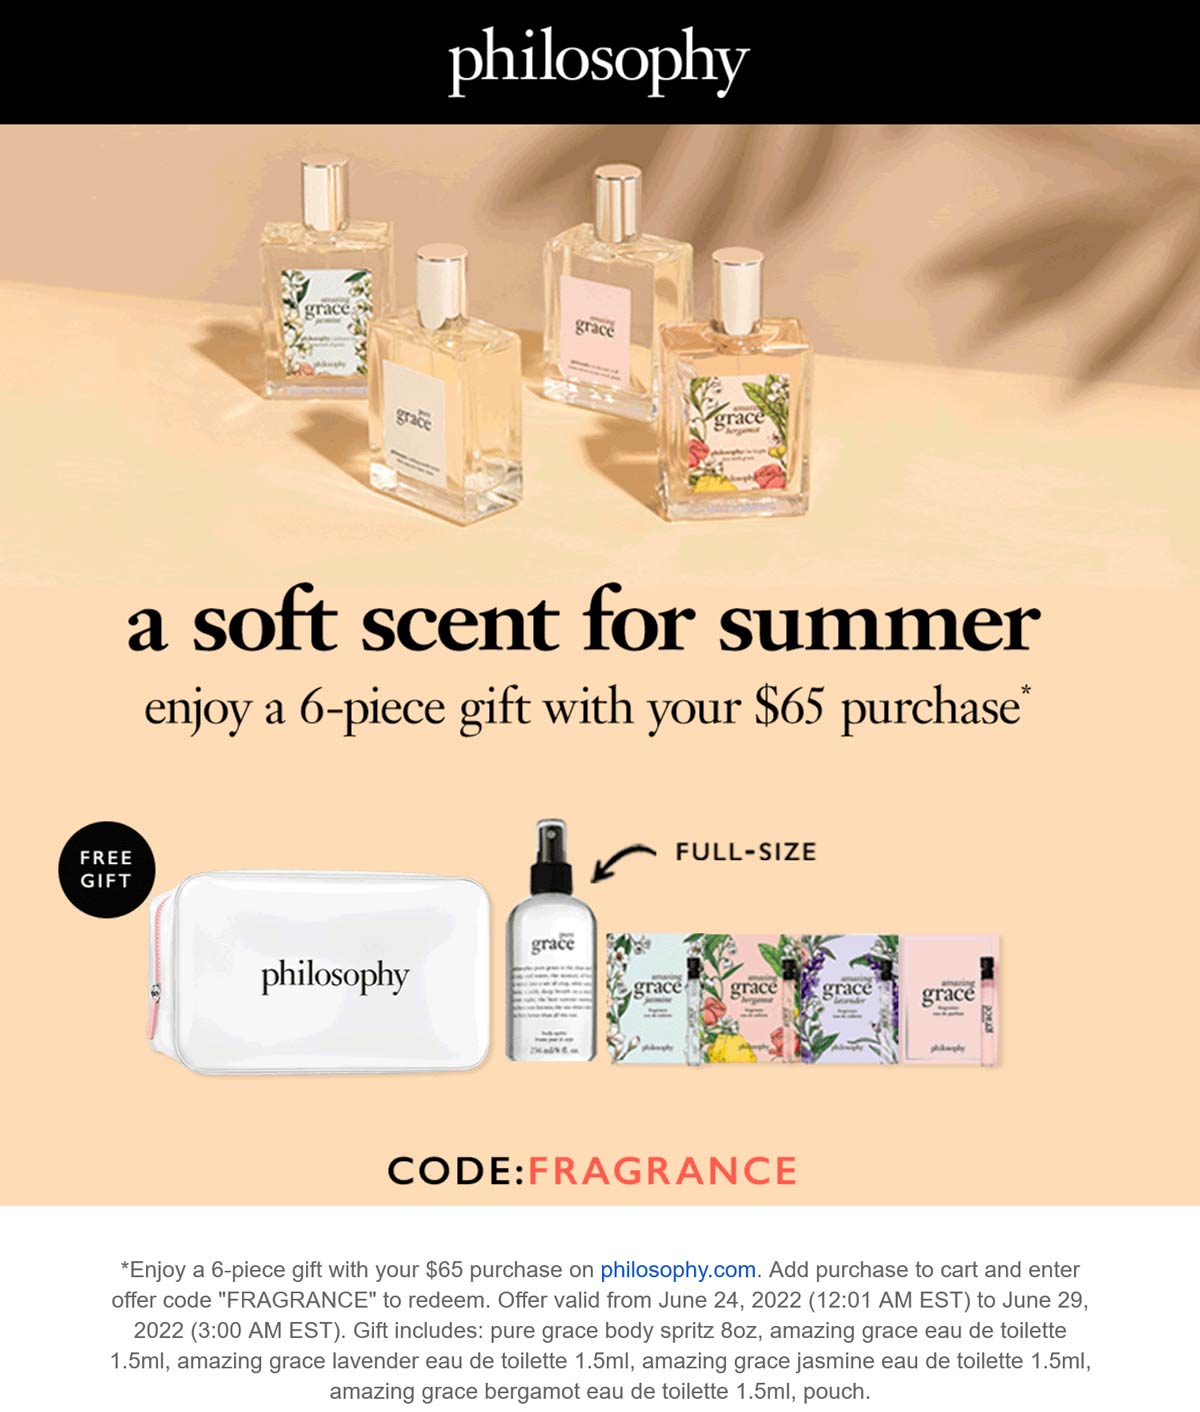 Philosophy stores Coupon  Free 6pc set on $60 at Philosophy via promo code FRAGRANCE #philosophy 